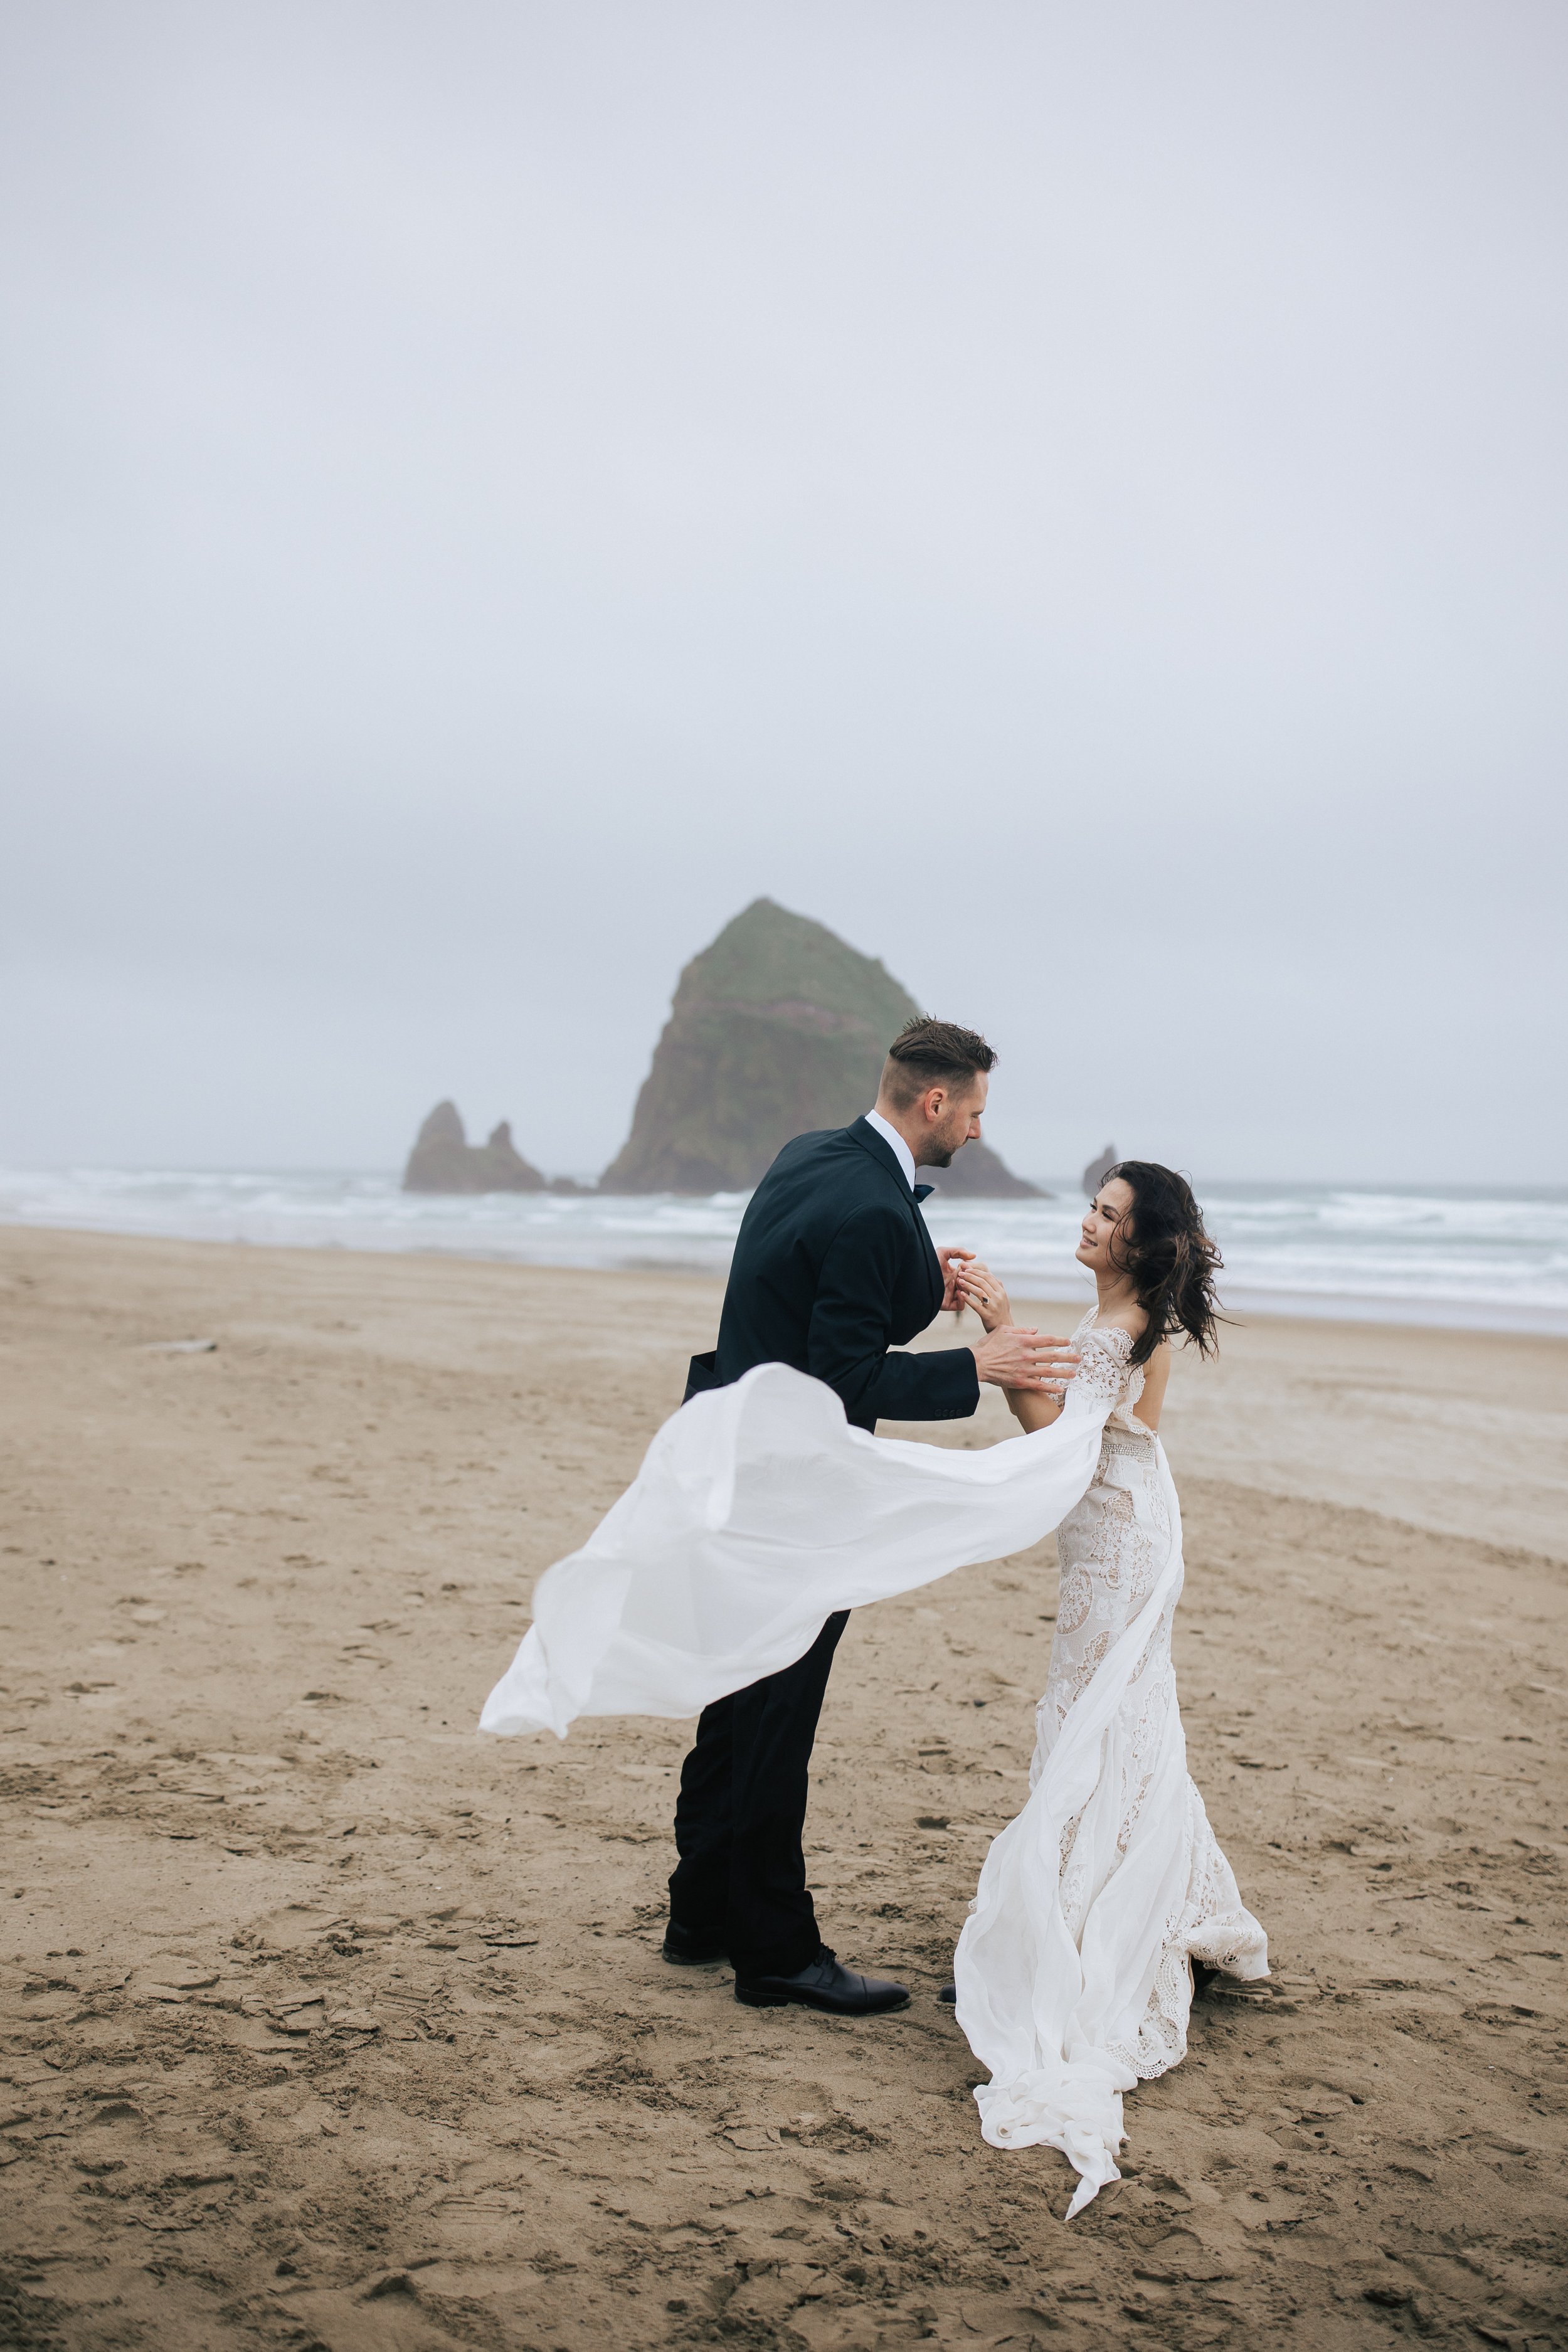  Looking for a peaceful wedding? plan your elopement to cannon beach for stunning photos like these pnw beach elopement emily jenkins photo wedding photographer in pacific northwest elopements #pnw #pnwwedding #pnwelopement #cannonbeach #cannonbeache